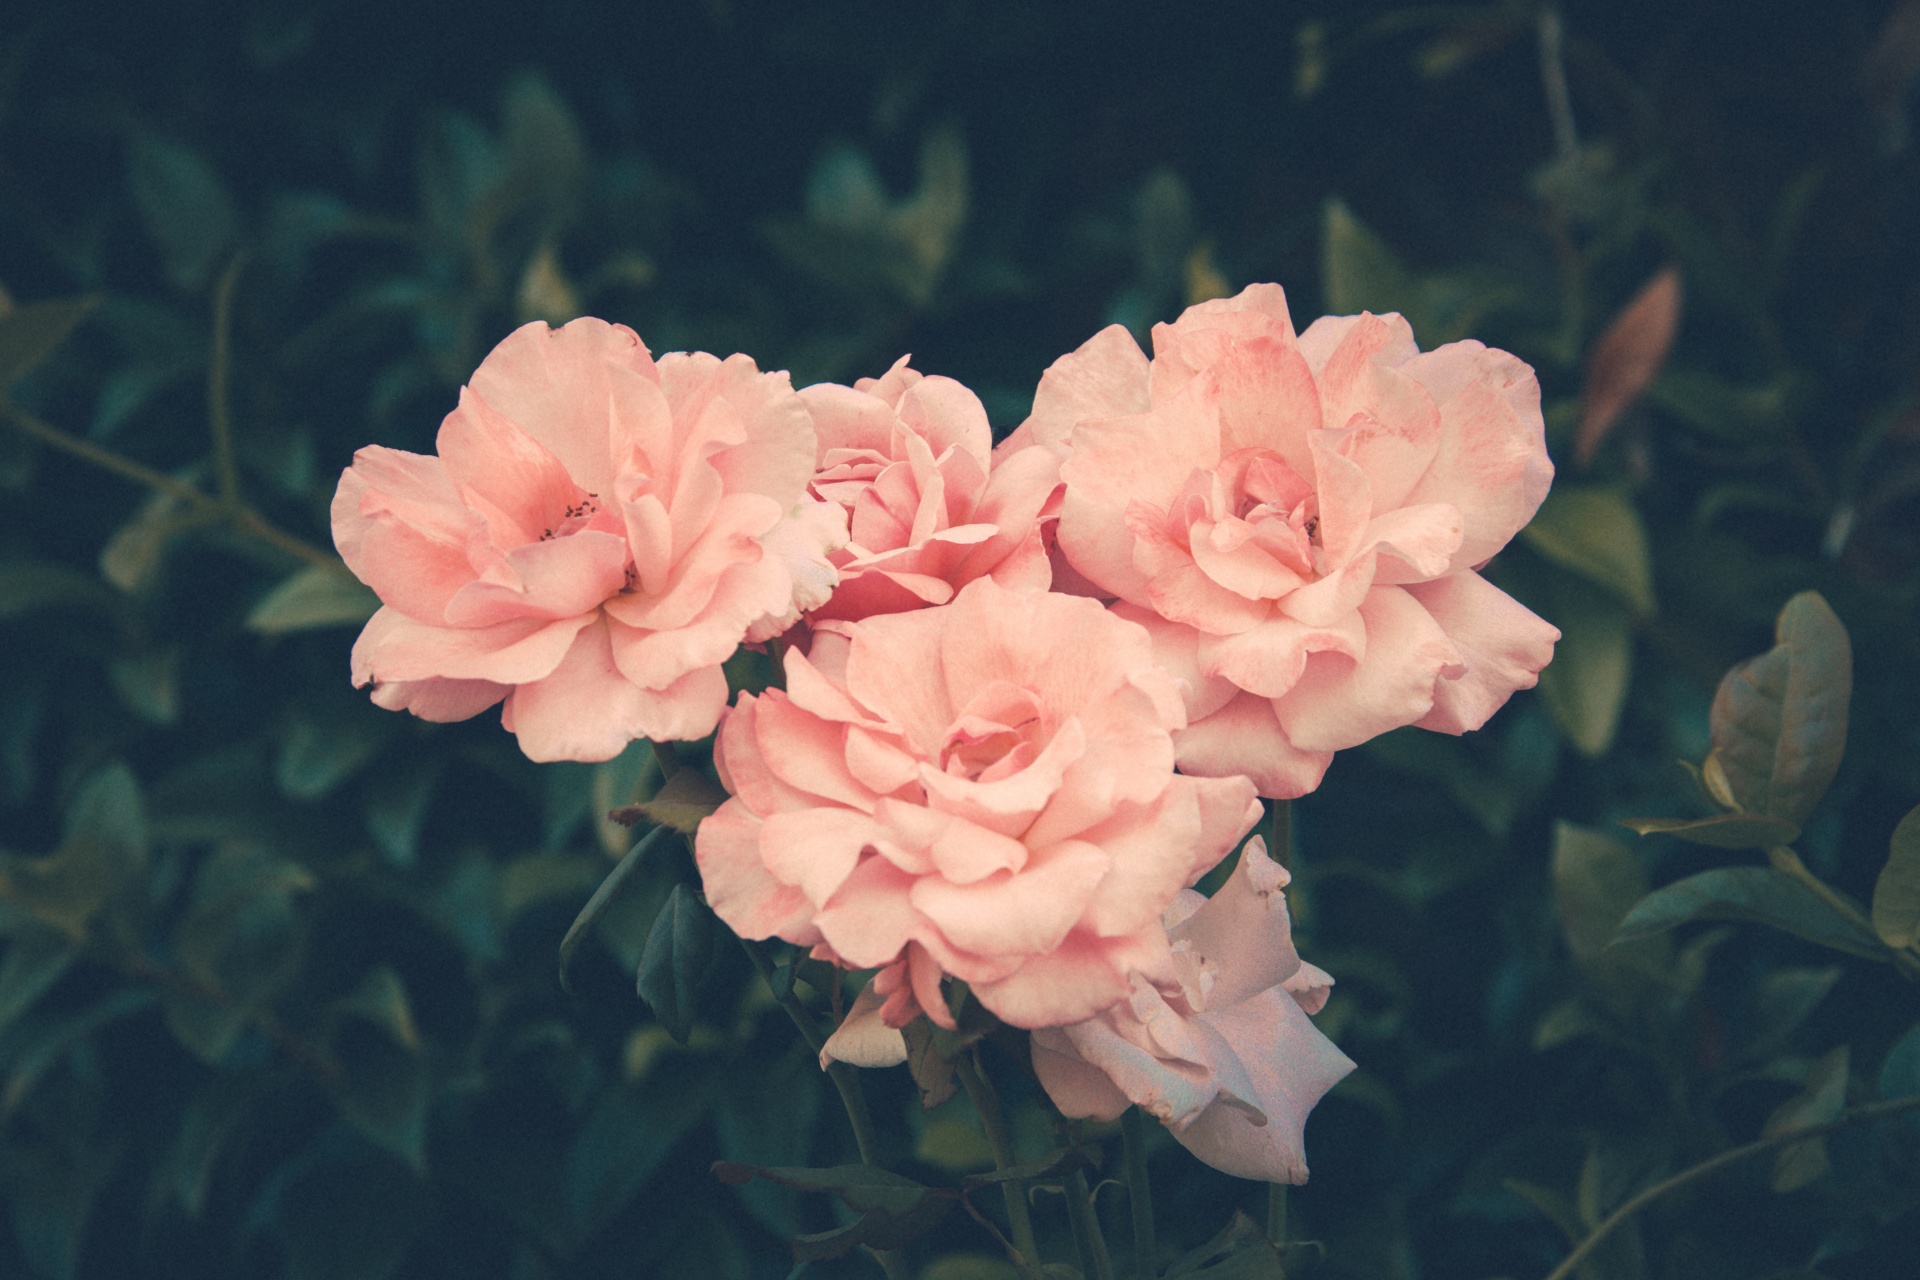 Bunch of pink roses in a vintage tint